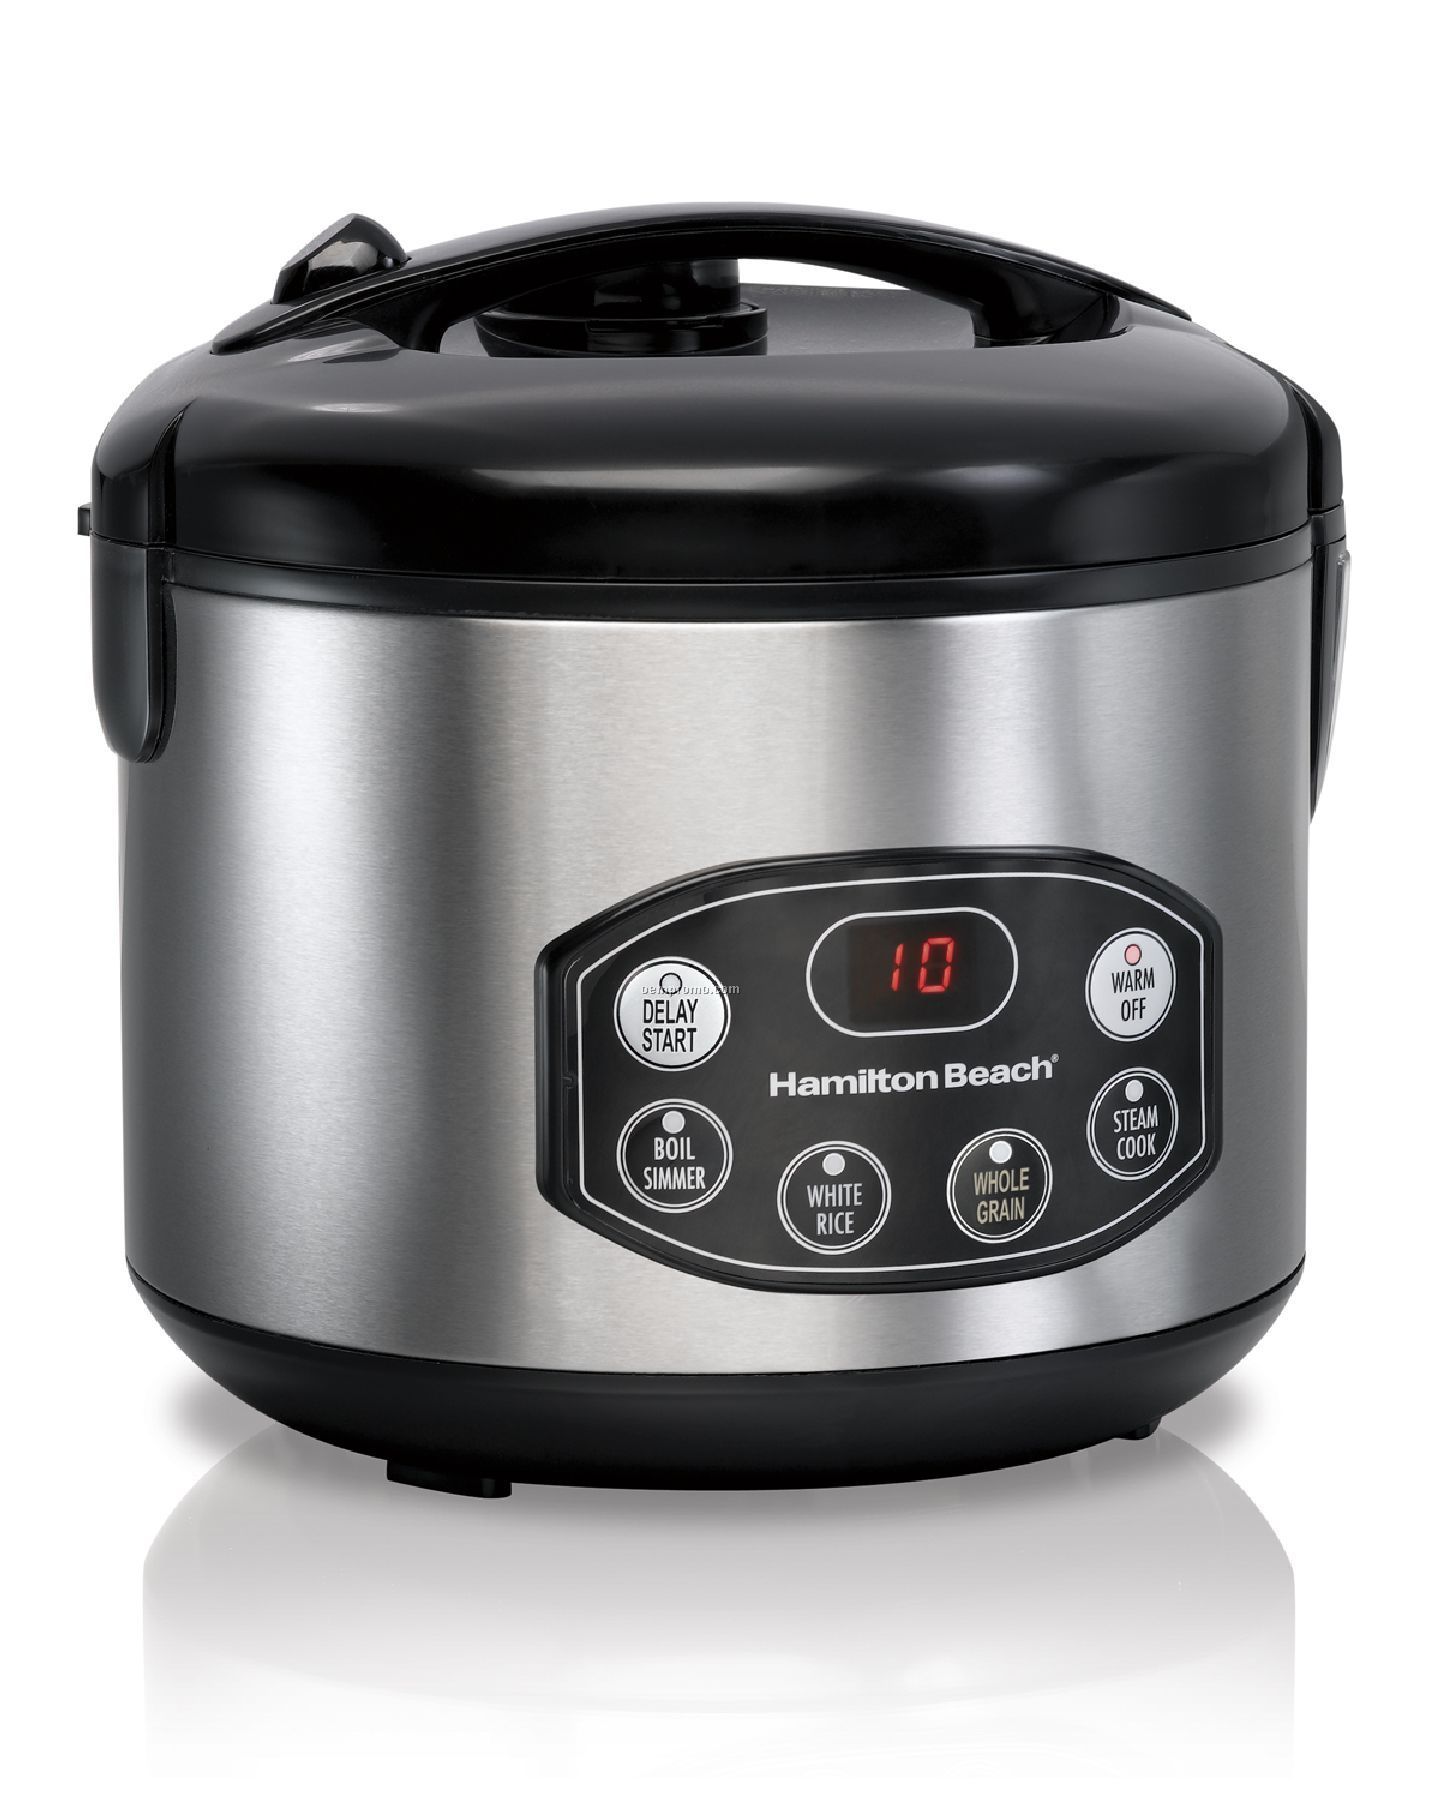 Hamilton Beach - Rice Cookers - 12cup Digital Rice Cooker